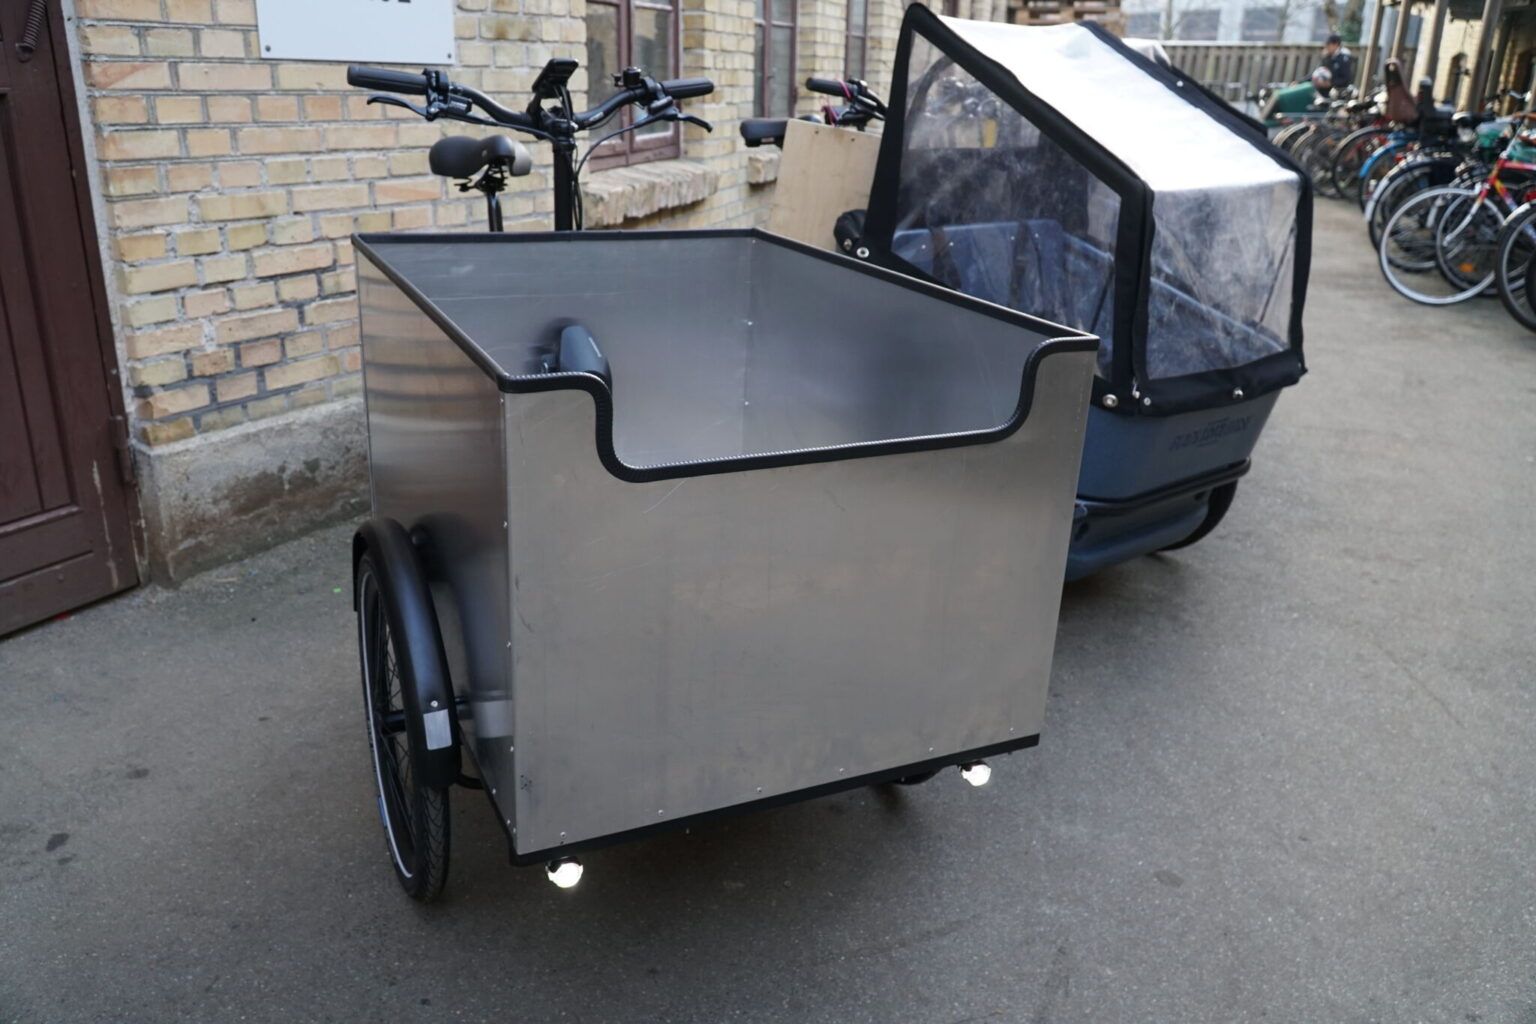 Photo of the OX cargo bike with an aluminium cargo box and no lid.